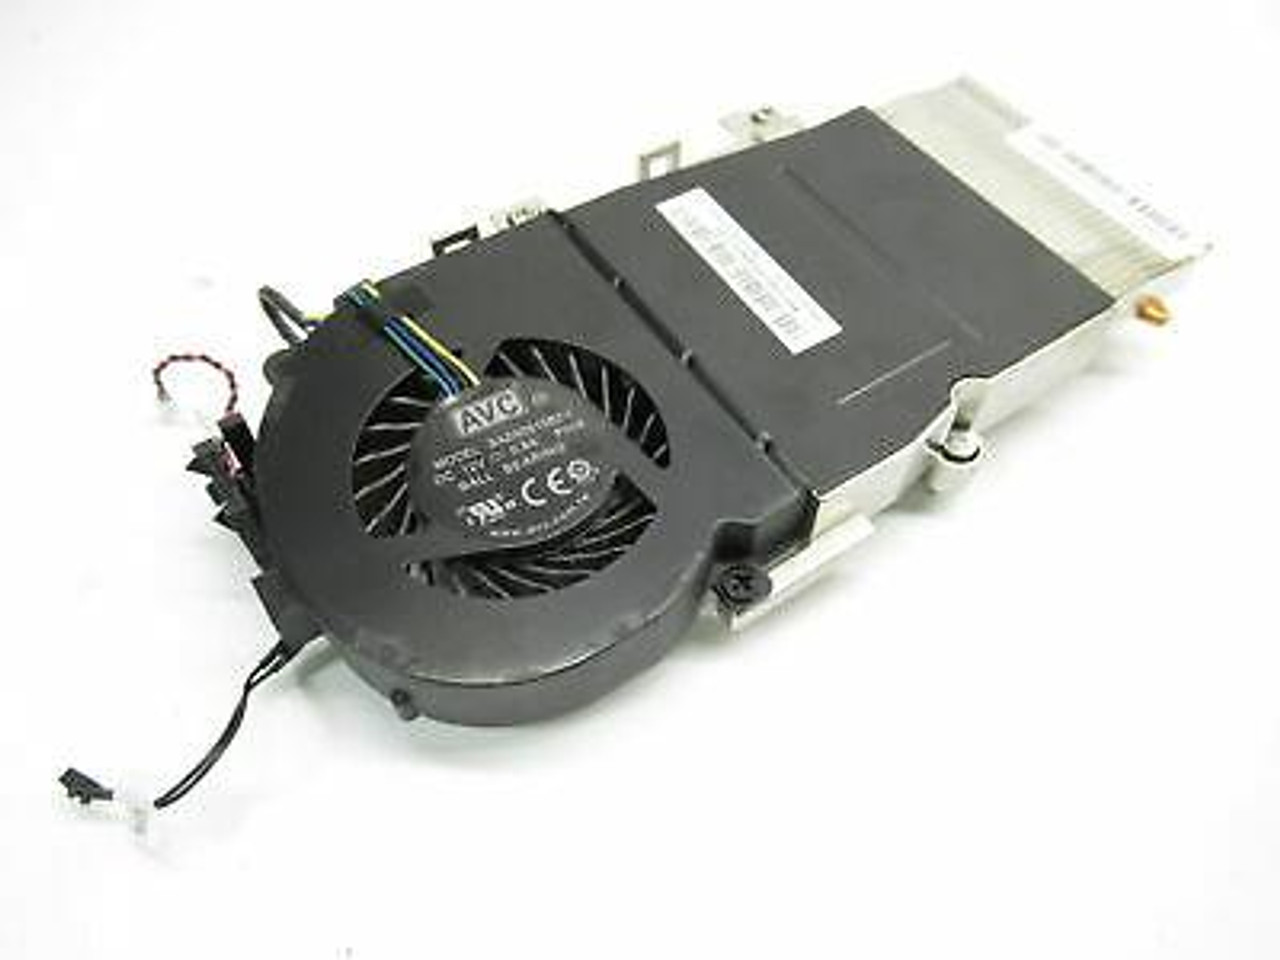 01EF347 IBM 35-Watts CPU Cooler Heatsink And Fan Assembly for M715Q